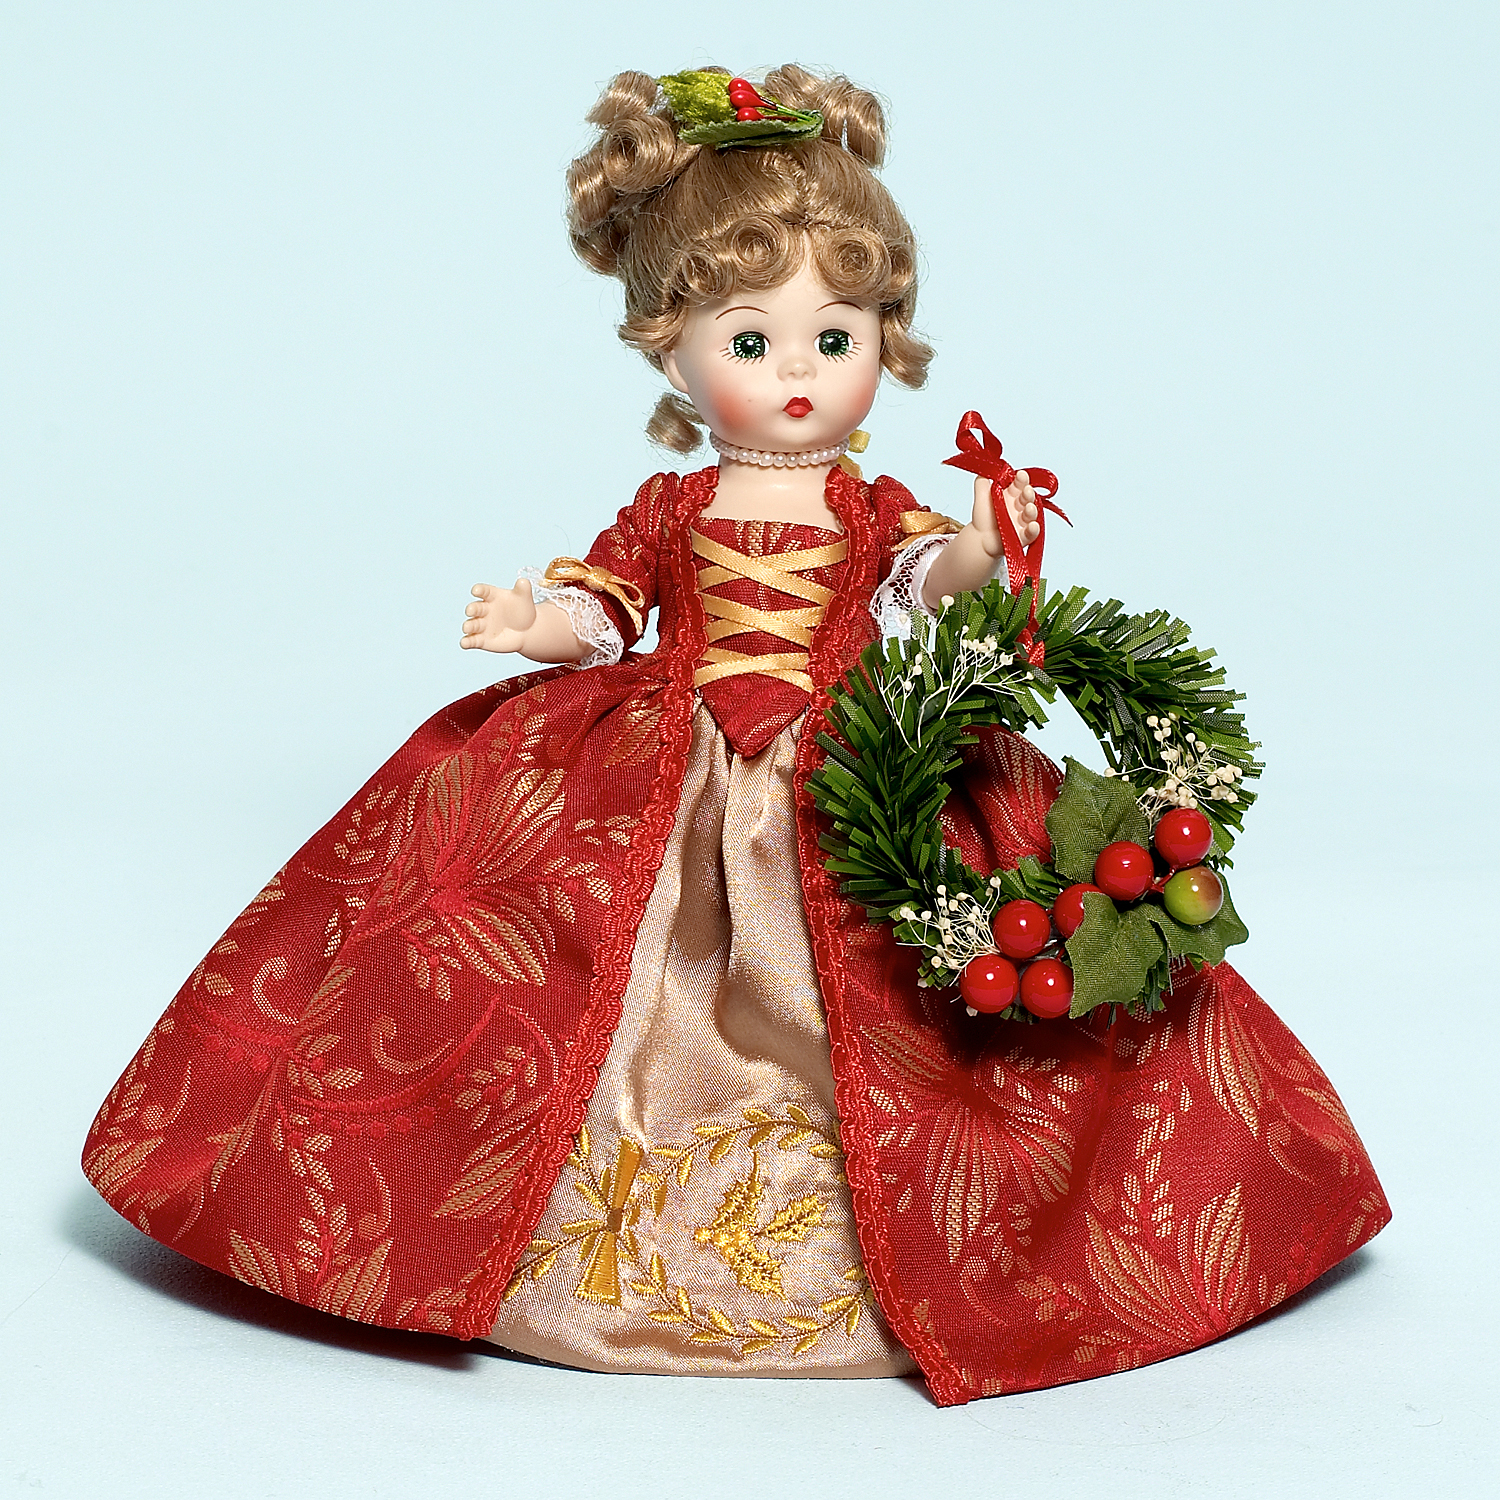 Christmas Wallpapers and Images and Photos Christmas doll